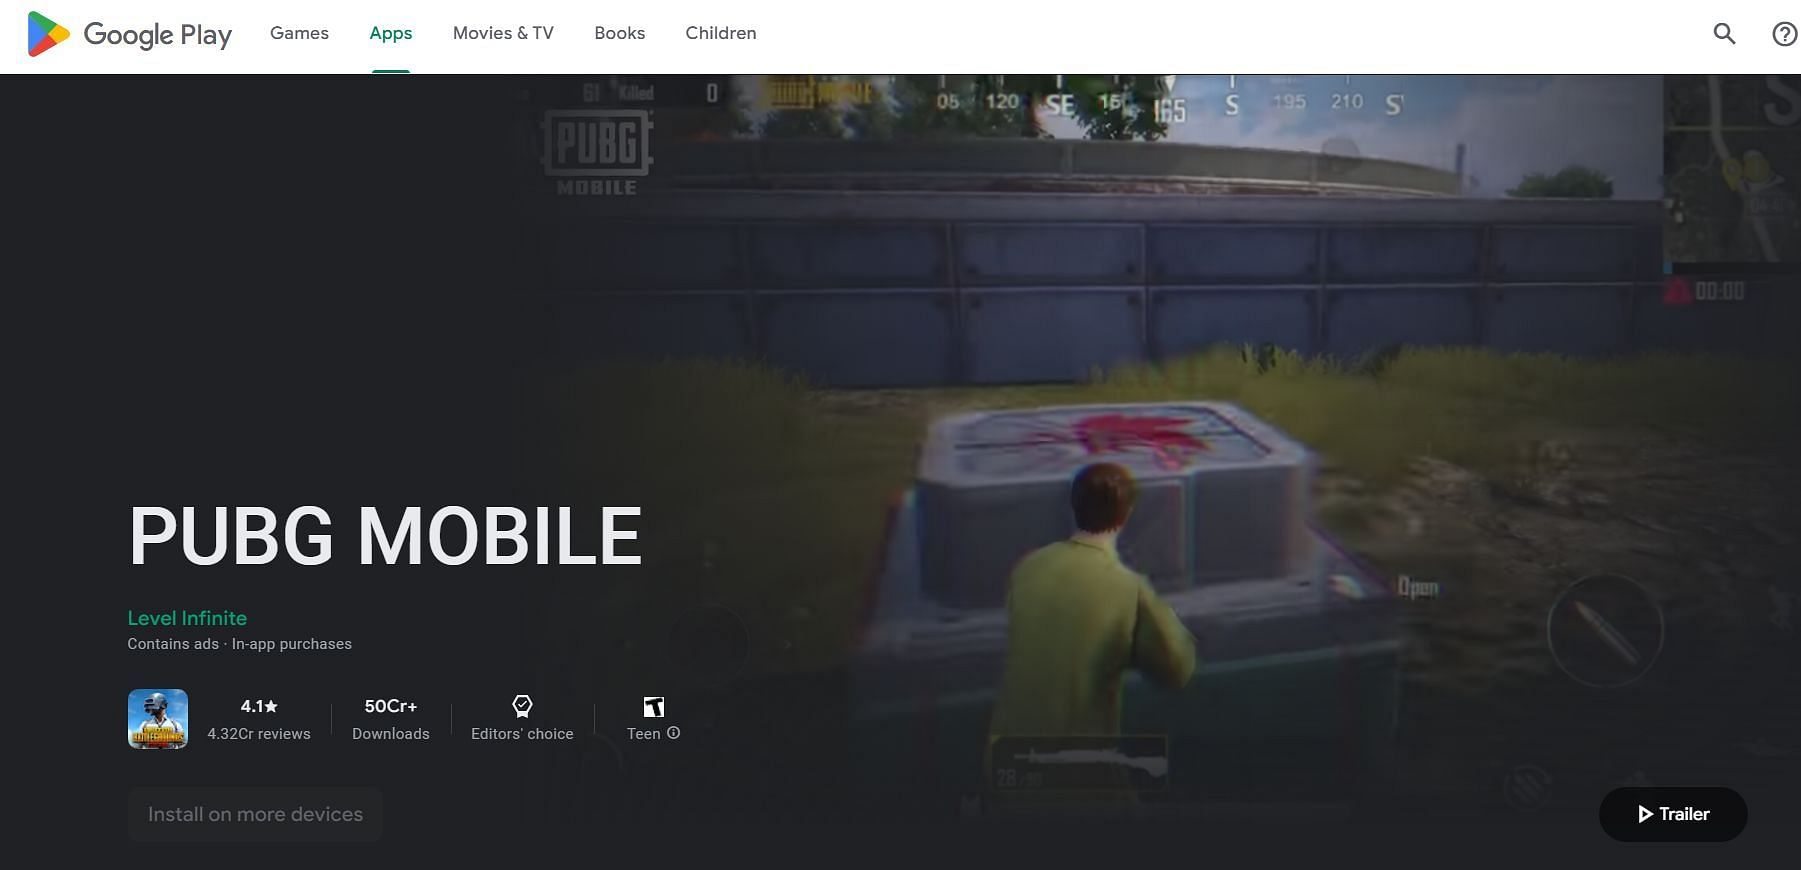 PUBG Mobile 2.2: Upadte schedule across different regions for the Google Play Store (Image via Google)